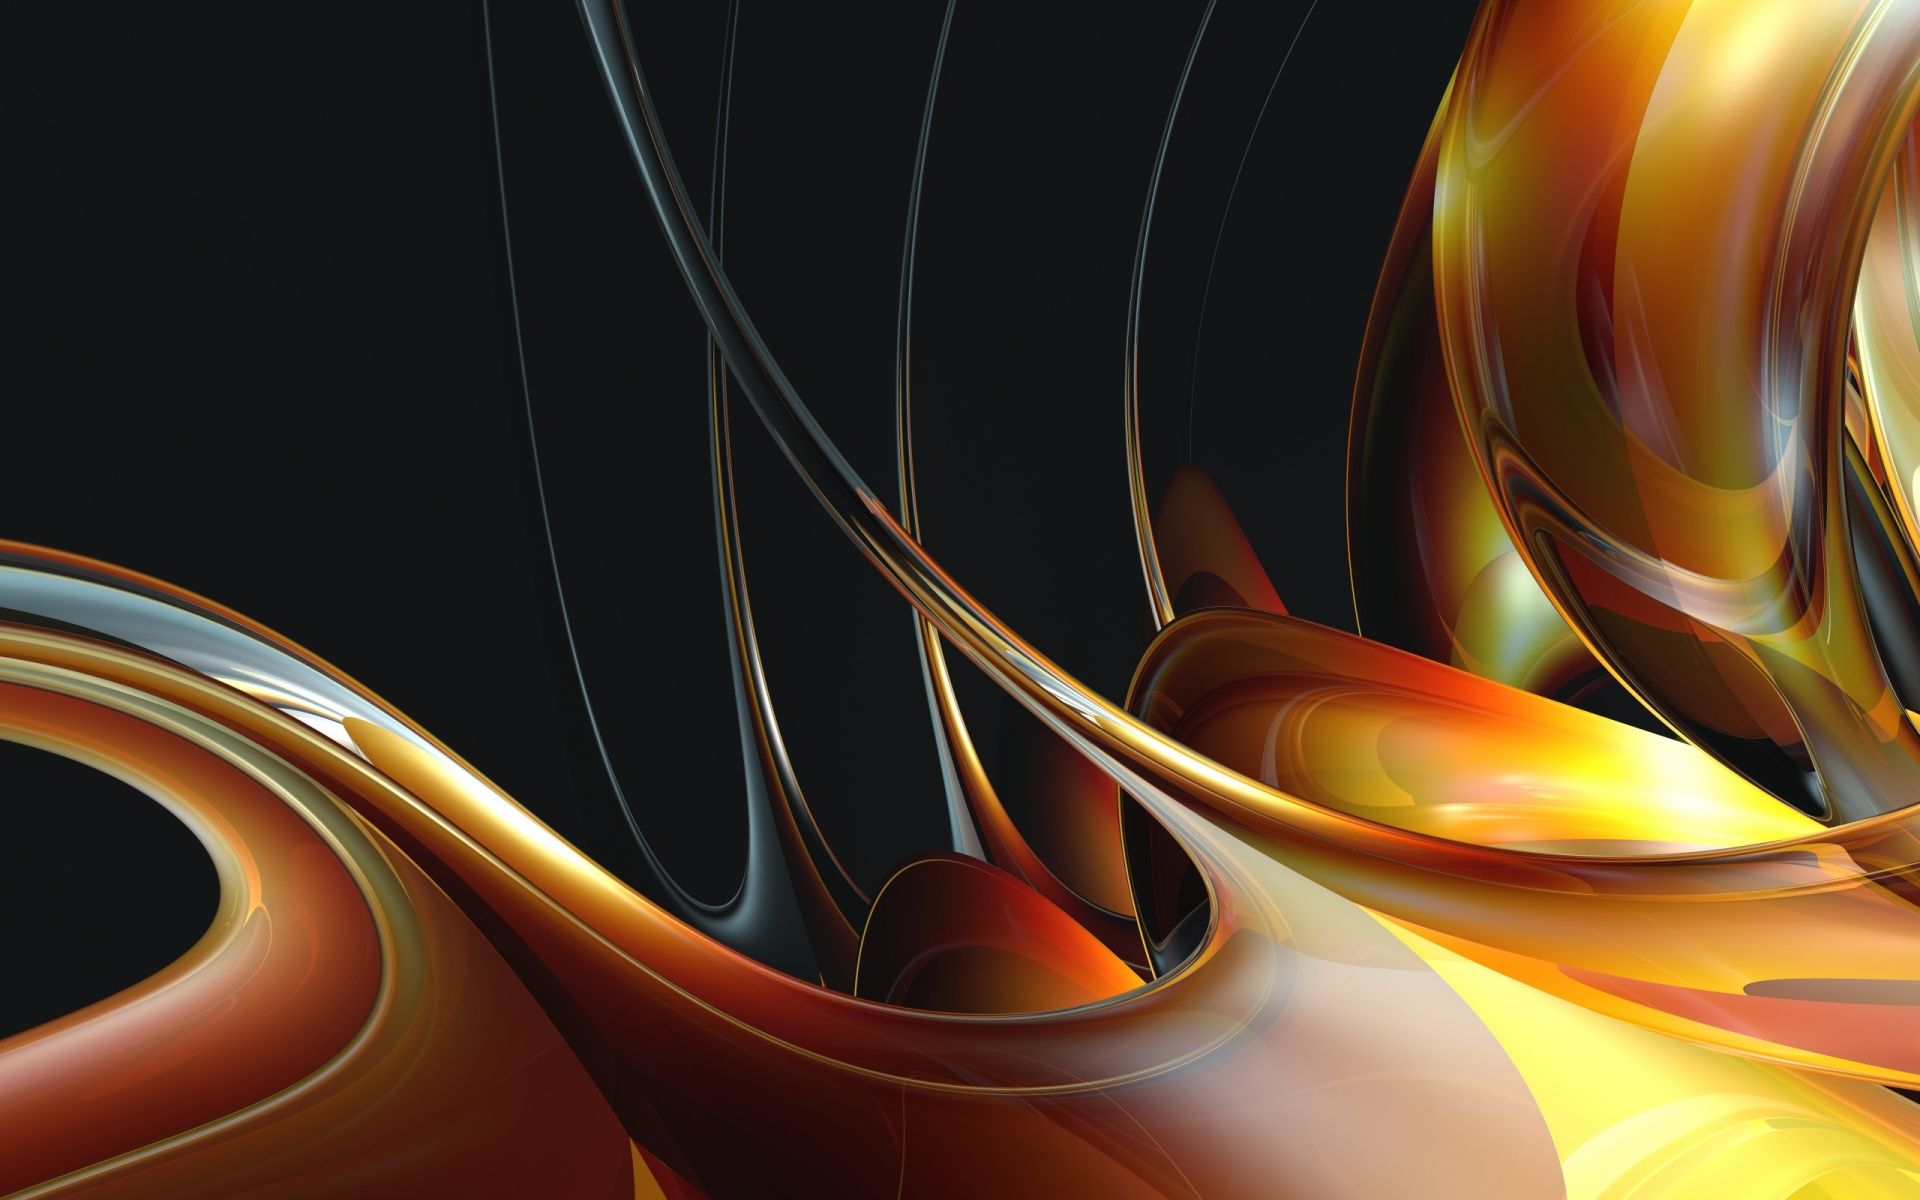 3d Abstract Art Realistic Oil Painting - Colour Gold And Black , HD Wallpaper & Backgrounds